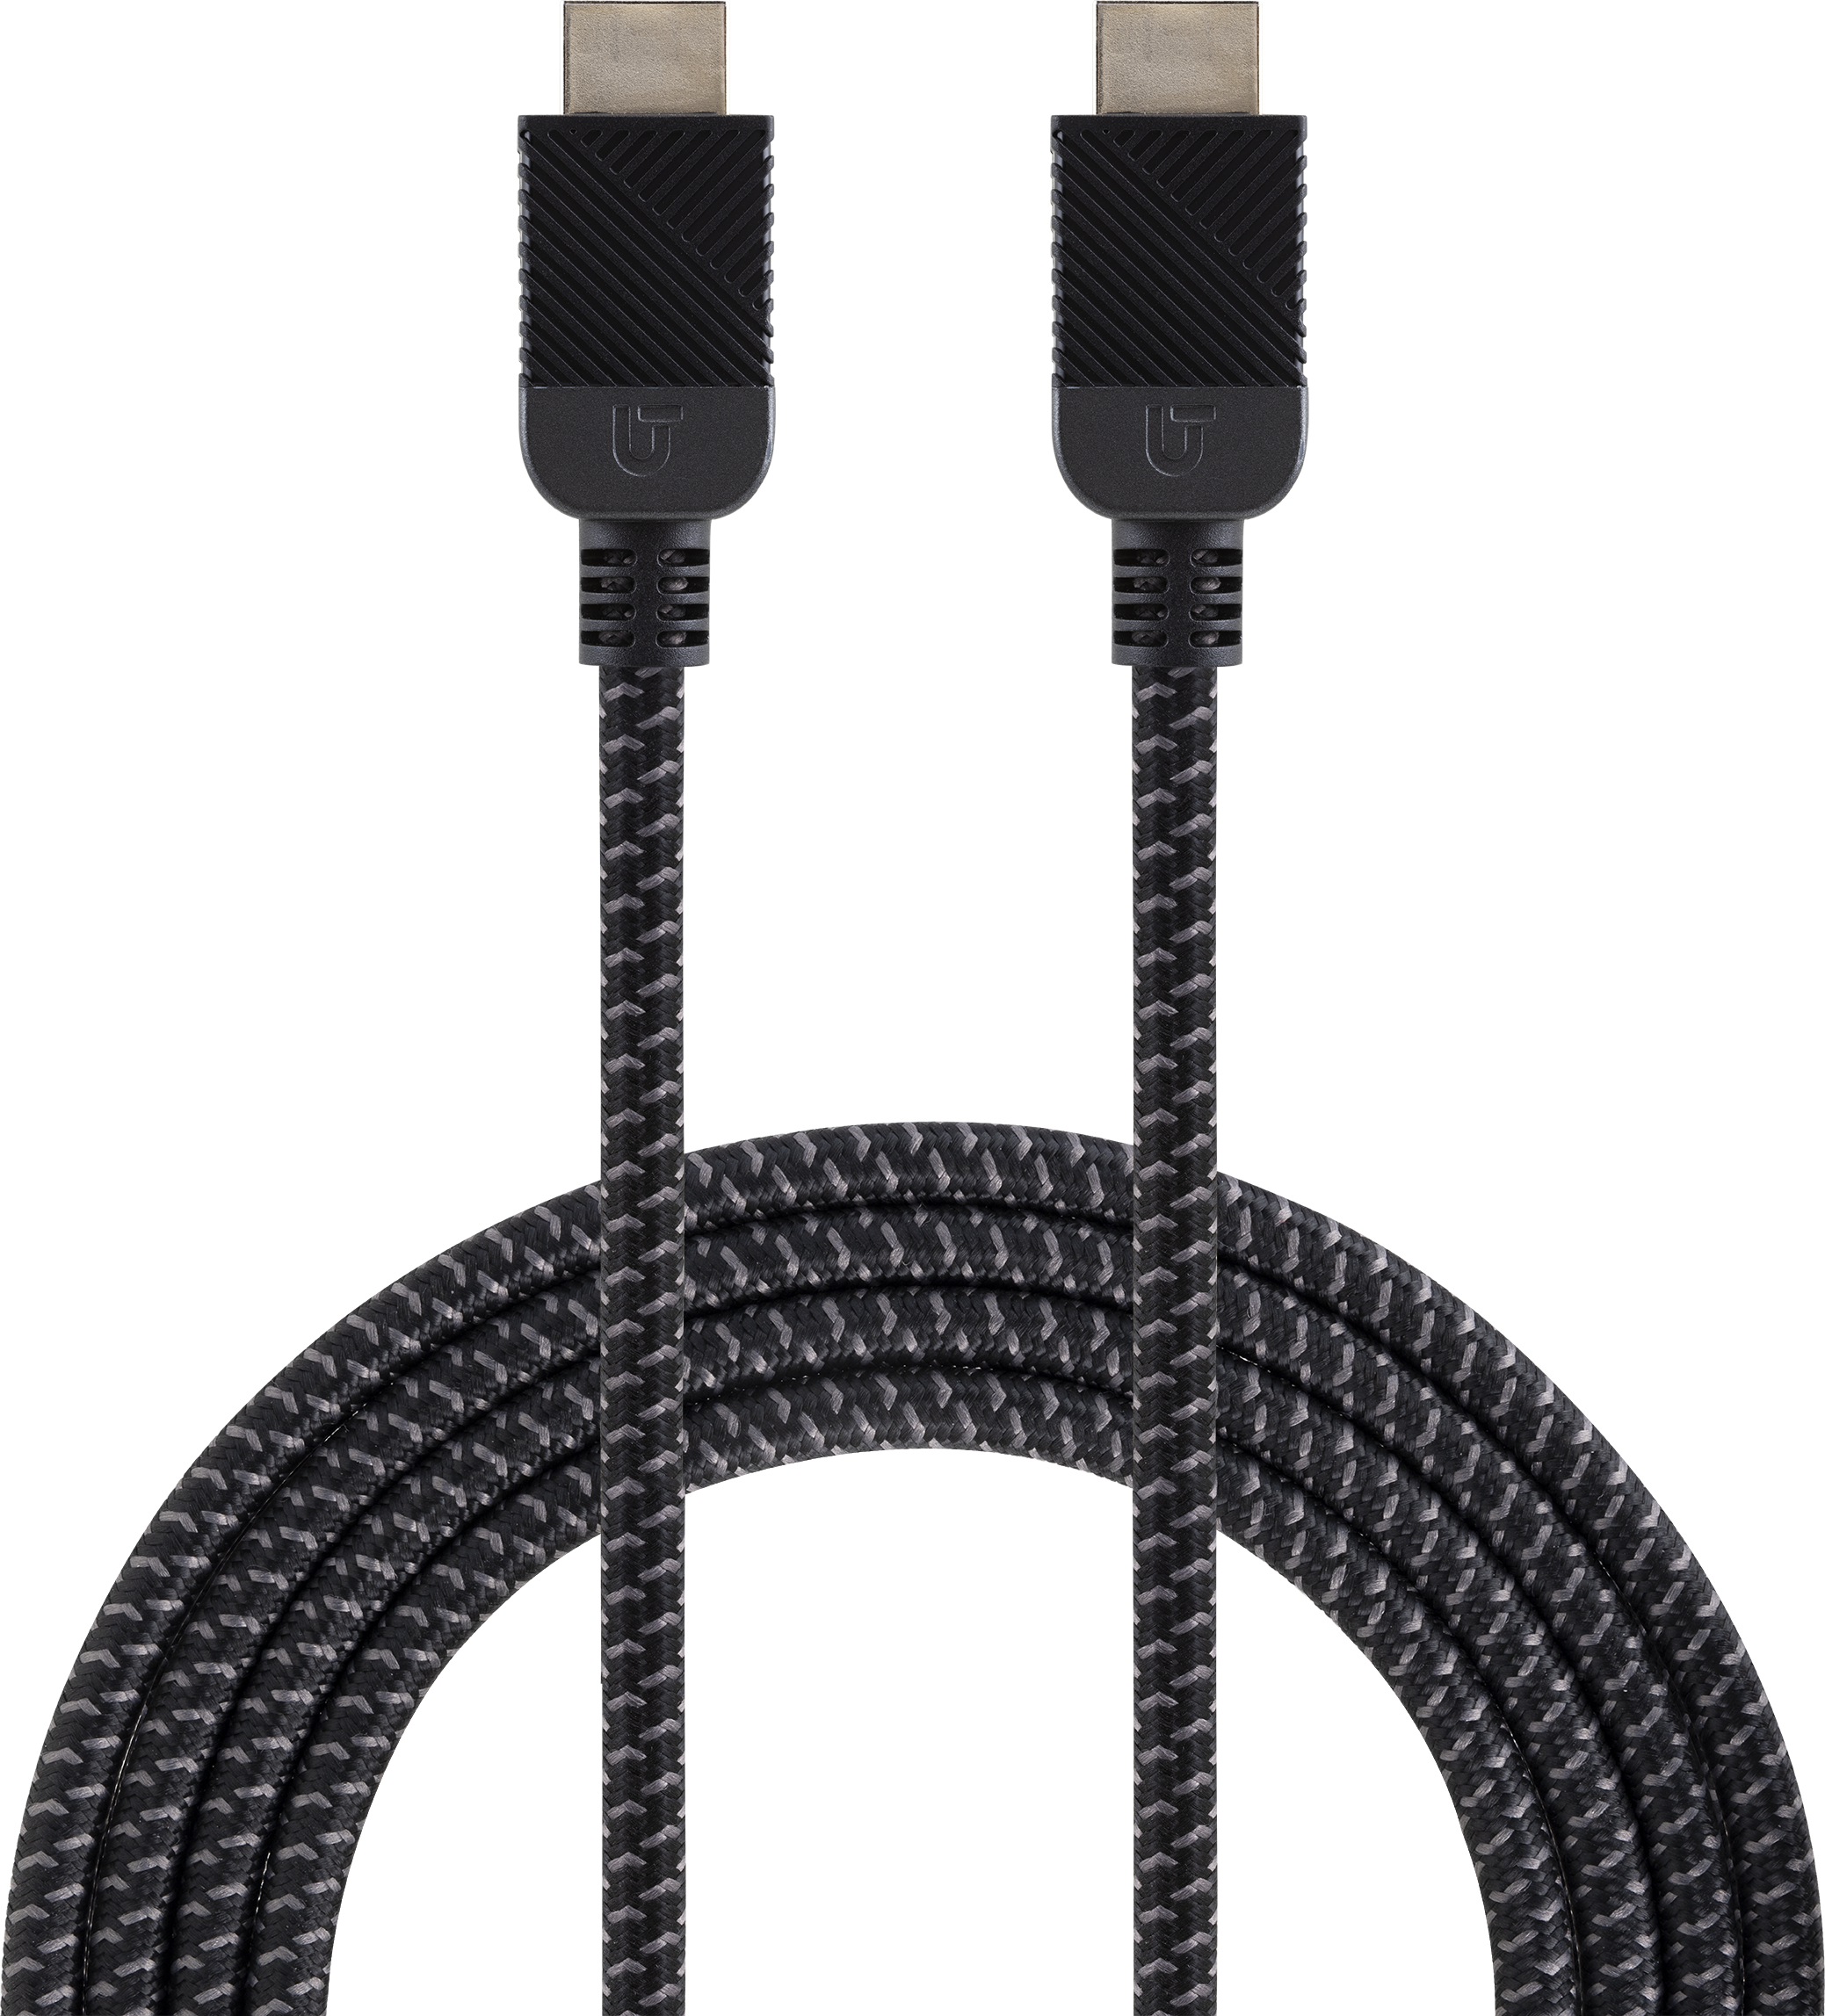  HDMI Cable 4K – 20ft – with A.I.S Shielding – Designed